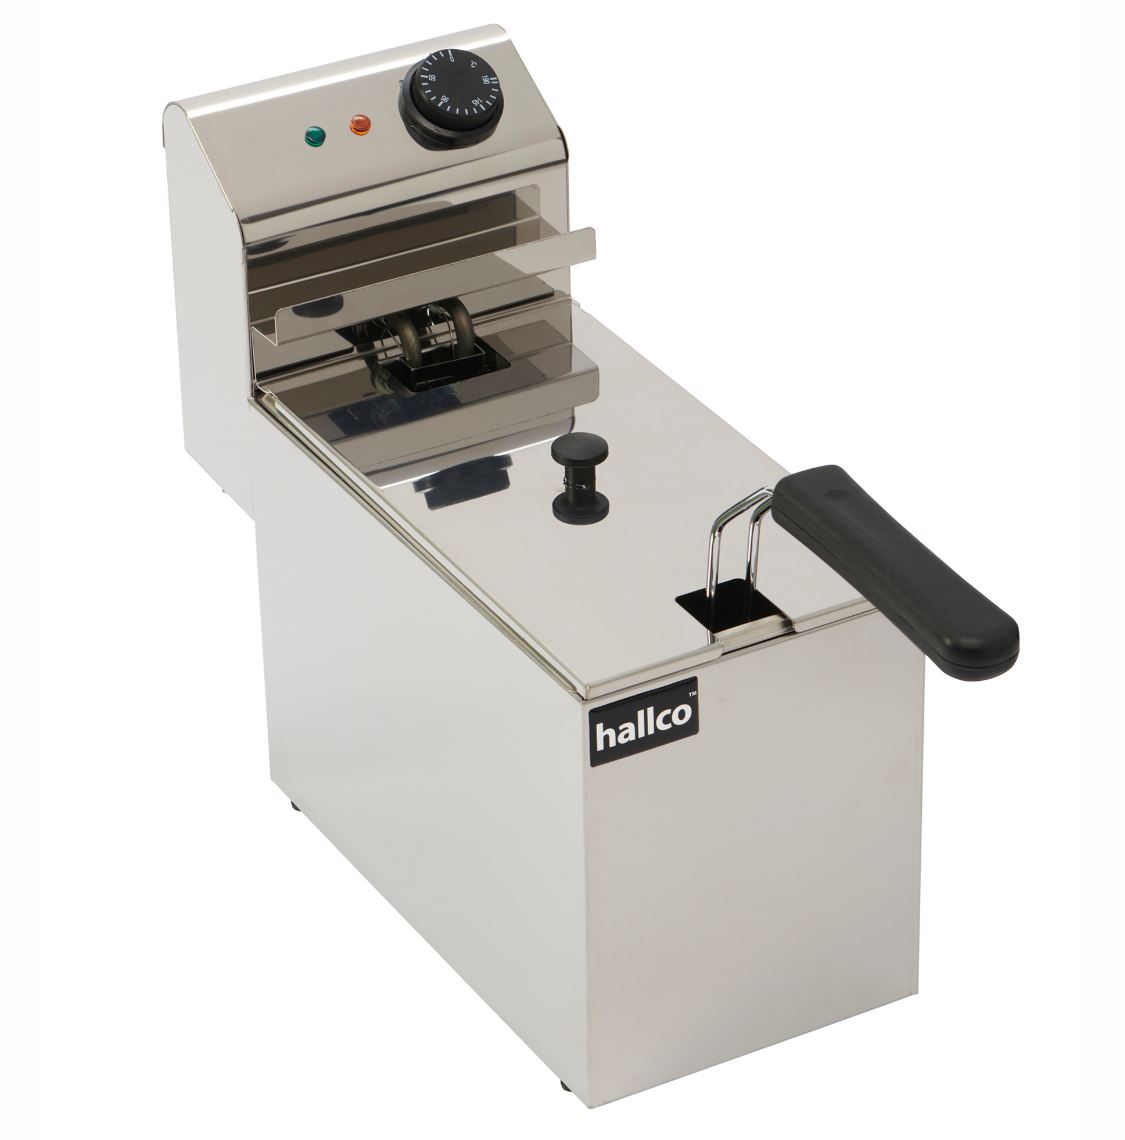 Hallco MSF5 Single Fryer with Lift Off Head - 3 Litres